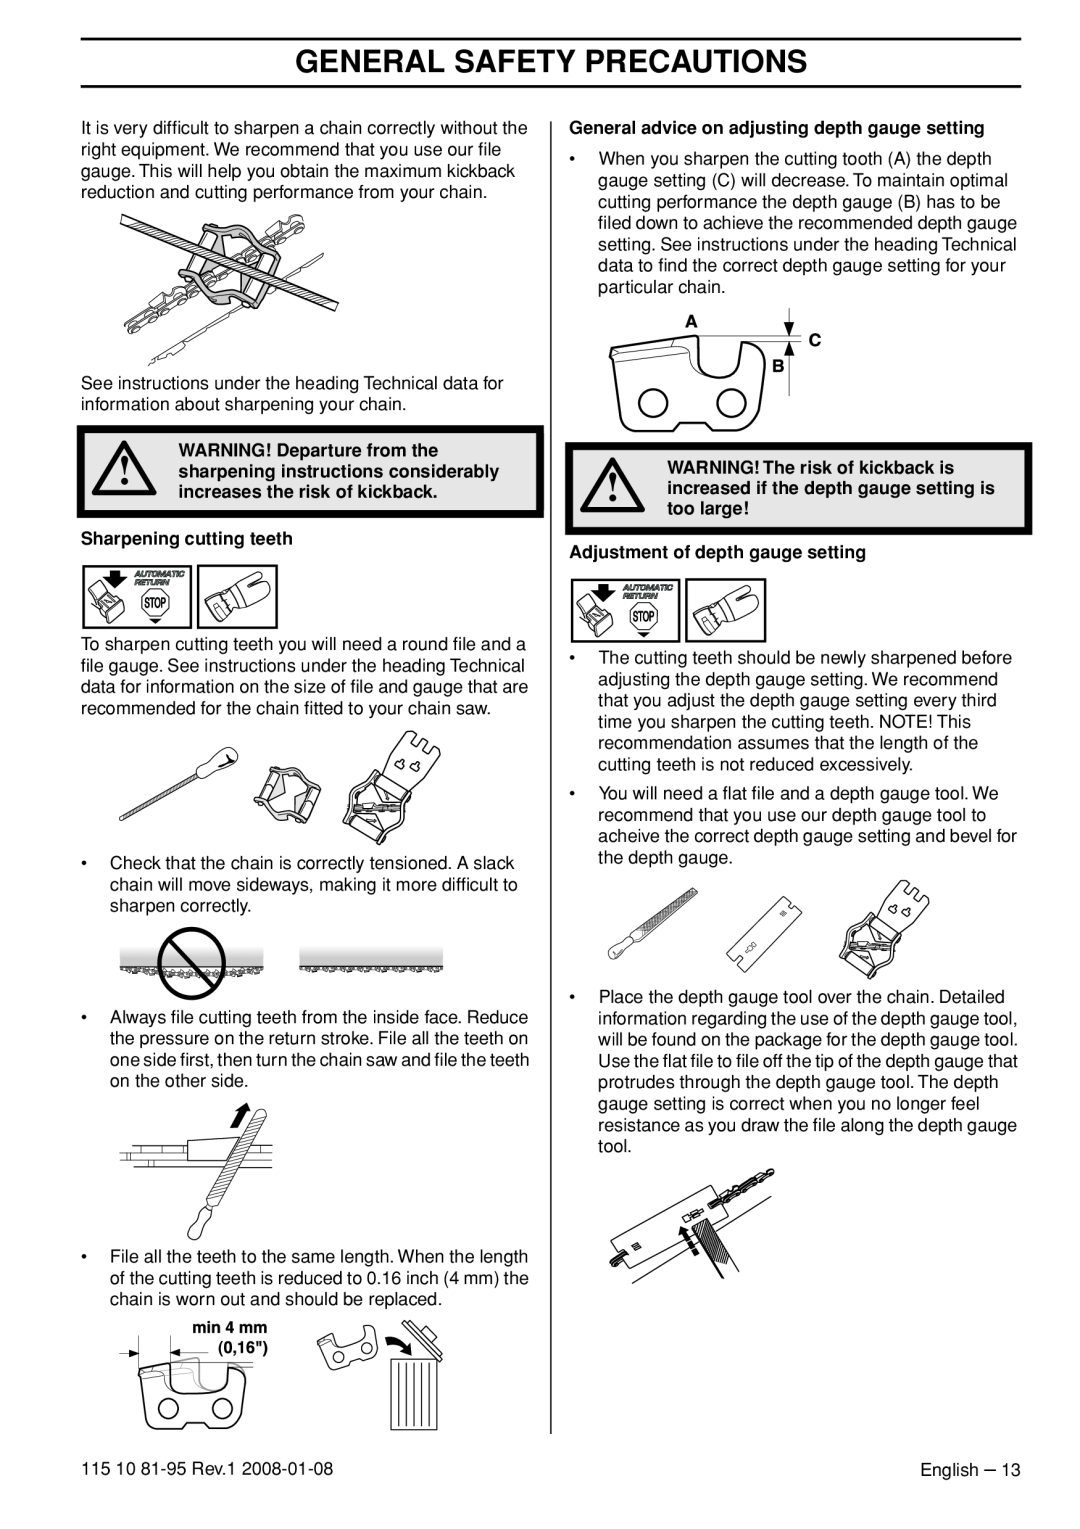 Husqvarna 440e General Safety Precautions, WARNING! Departure from the, sharpening instructions considerably, too large 